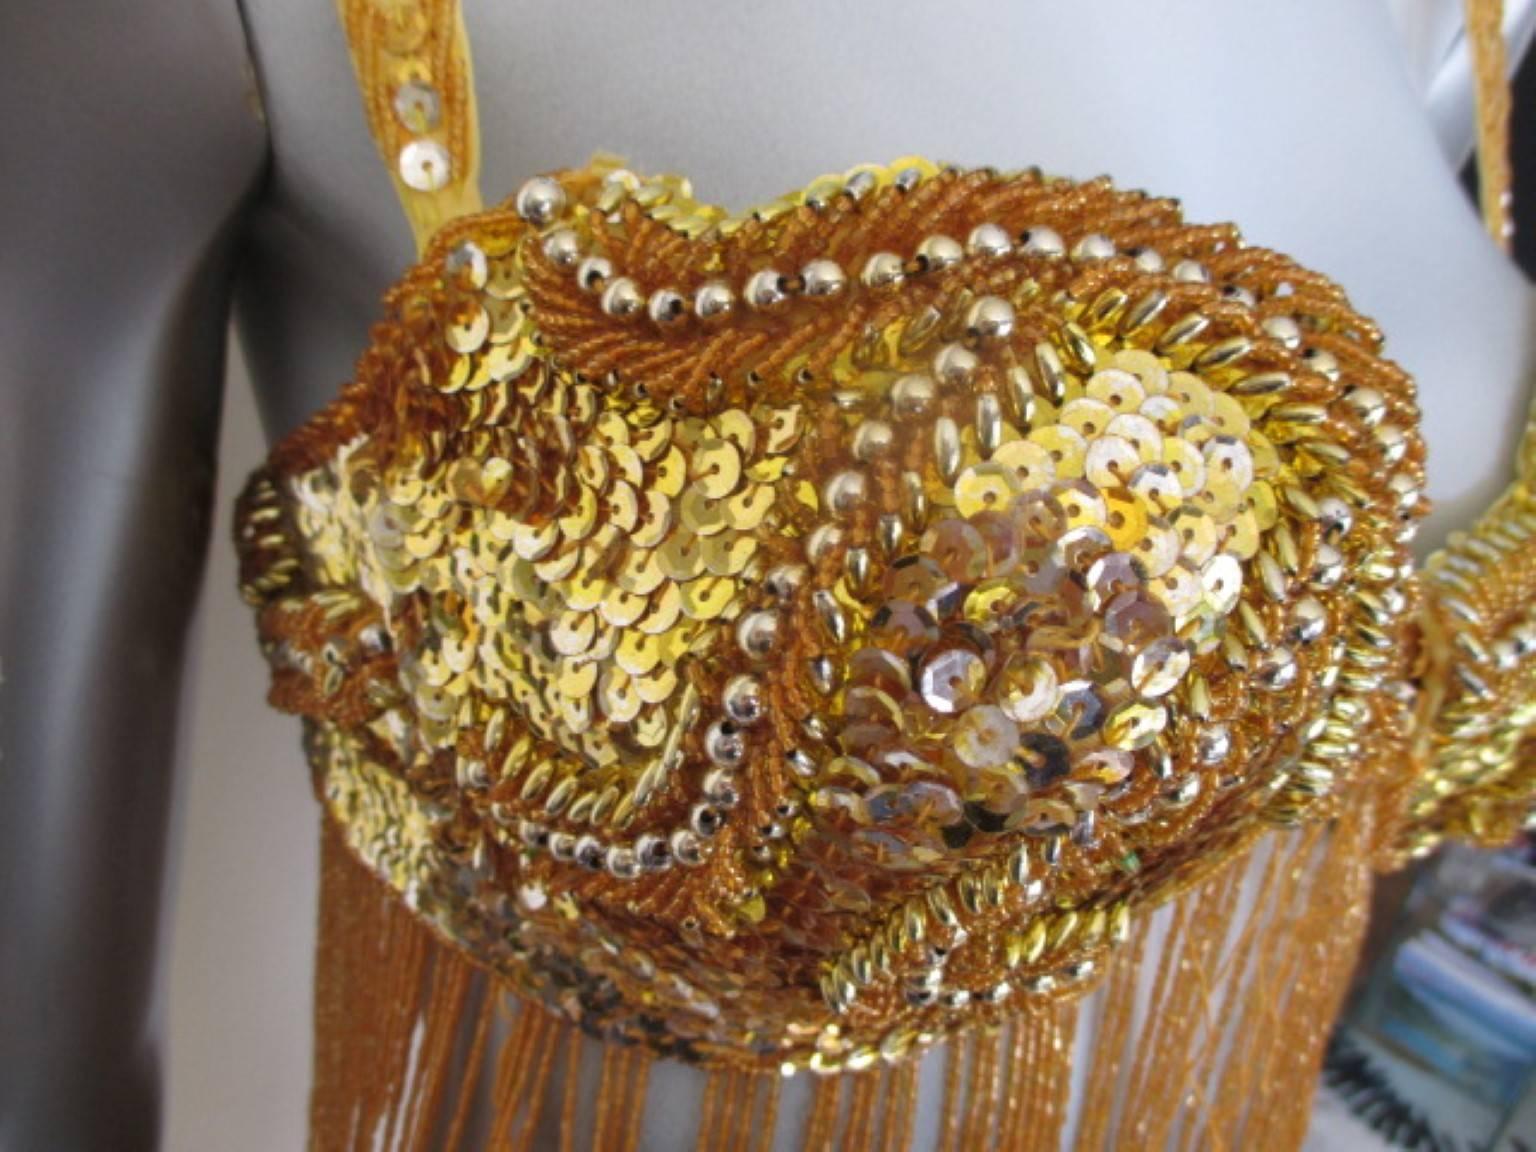 This bra is made from gold color sequins and fringe,
Its in good condition with minimum wear of use.
Size 80 cm/ 31.49 inch

Please note that vintage items are not new and therefore might have minor imperfections.